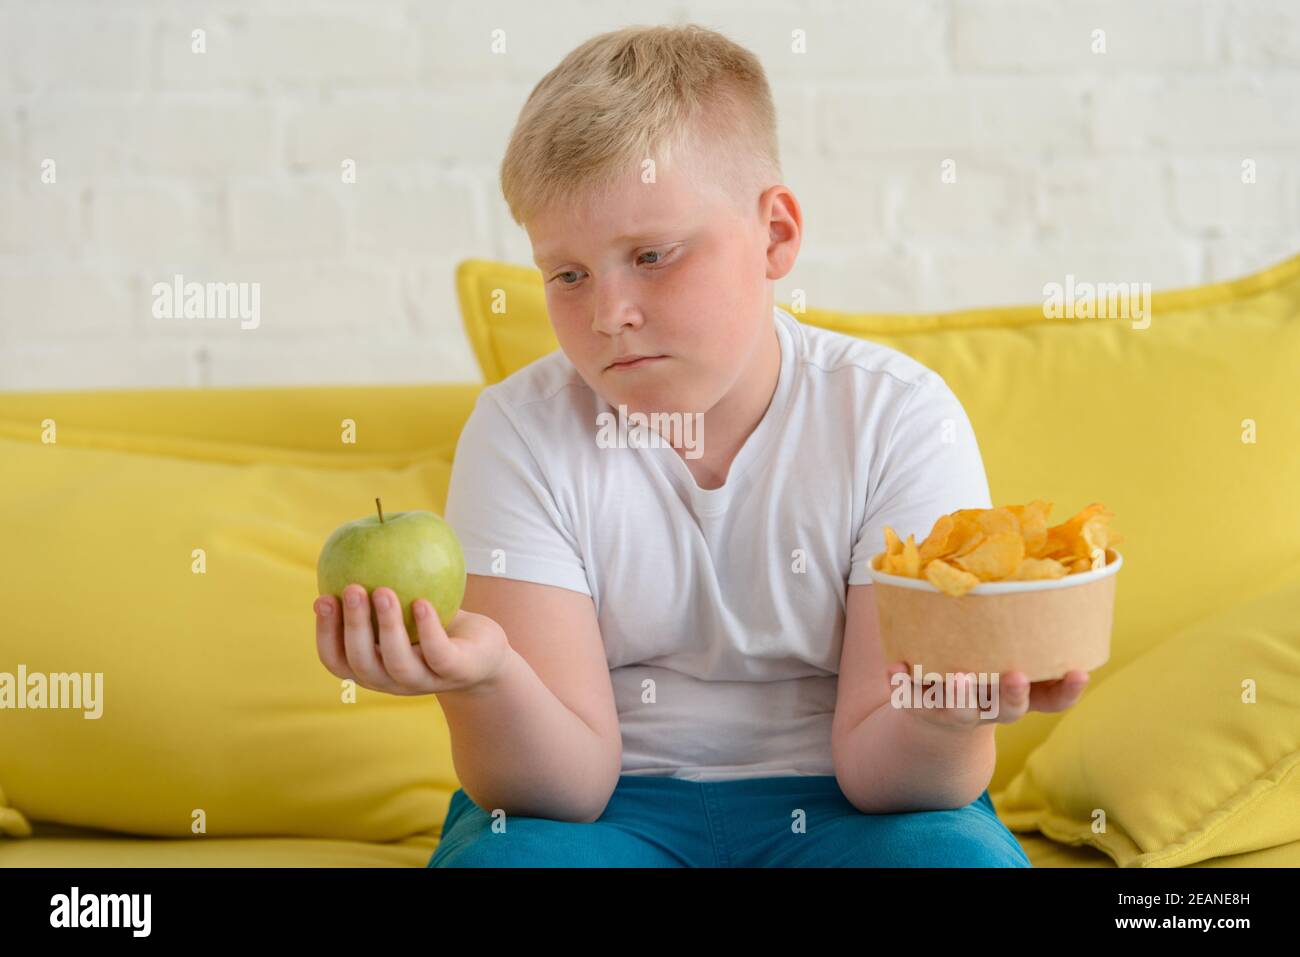 Sad fat boy looking at an apple and holding a cup of chips in another hand Stock Photo